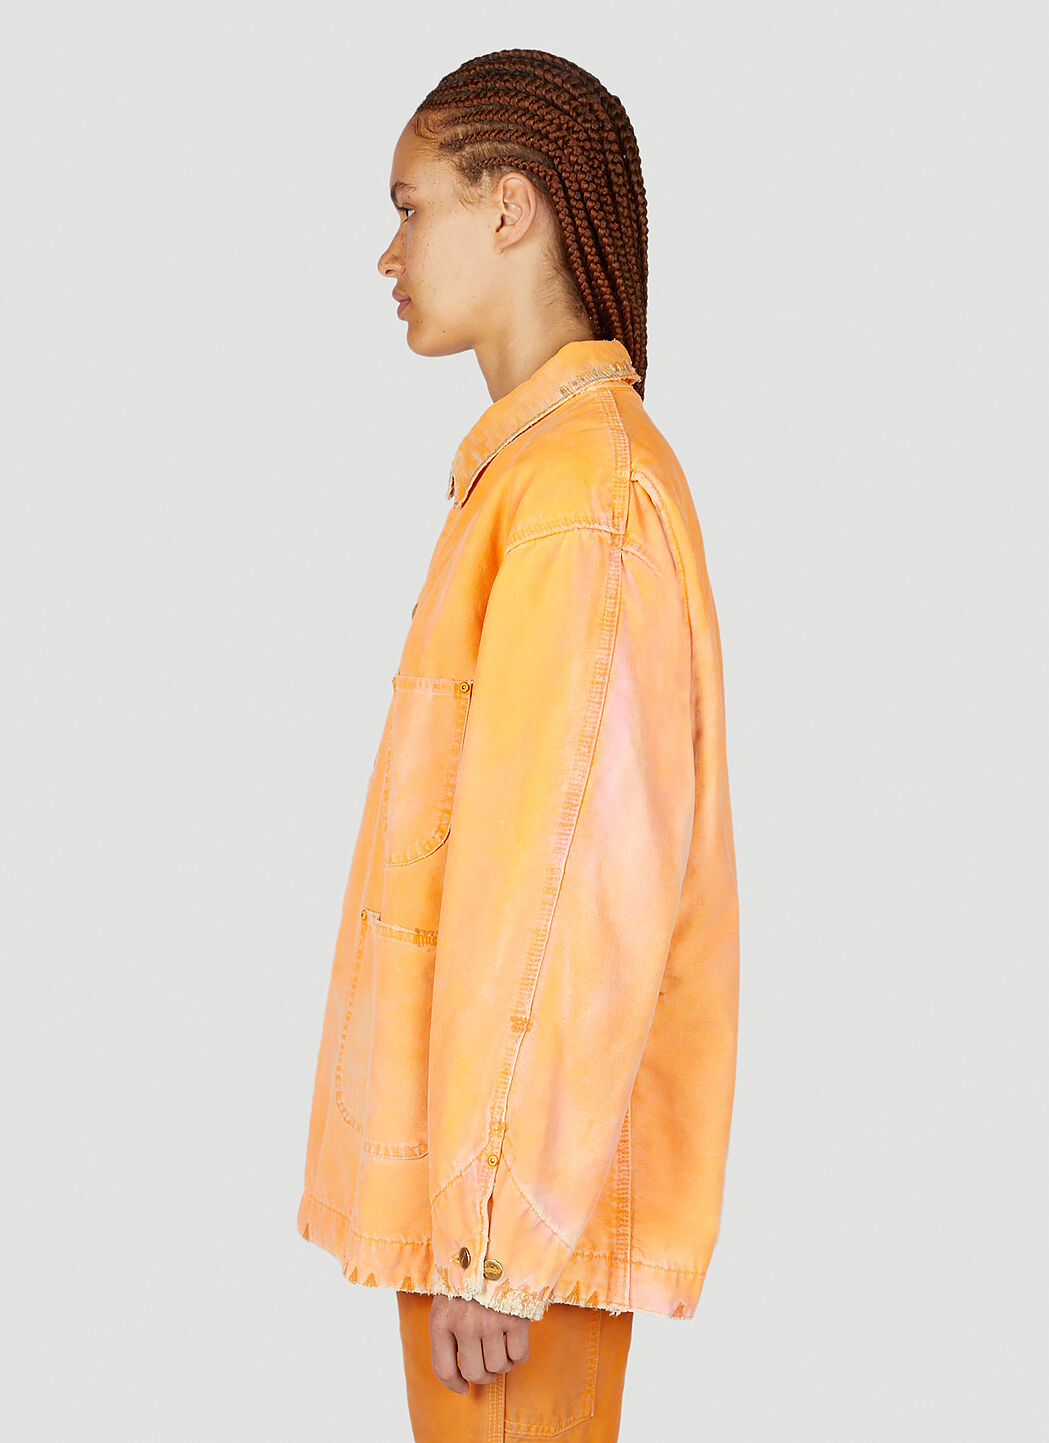 NOTSONORMAL Washed Chore Jacket in Orange | LN-CC®